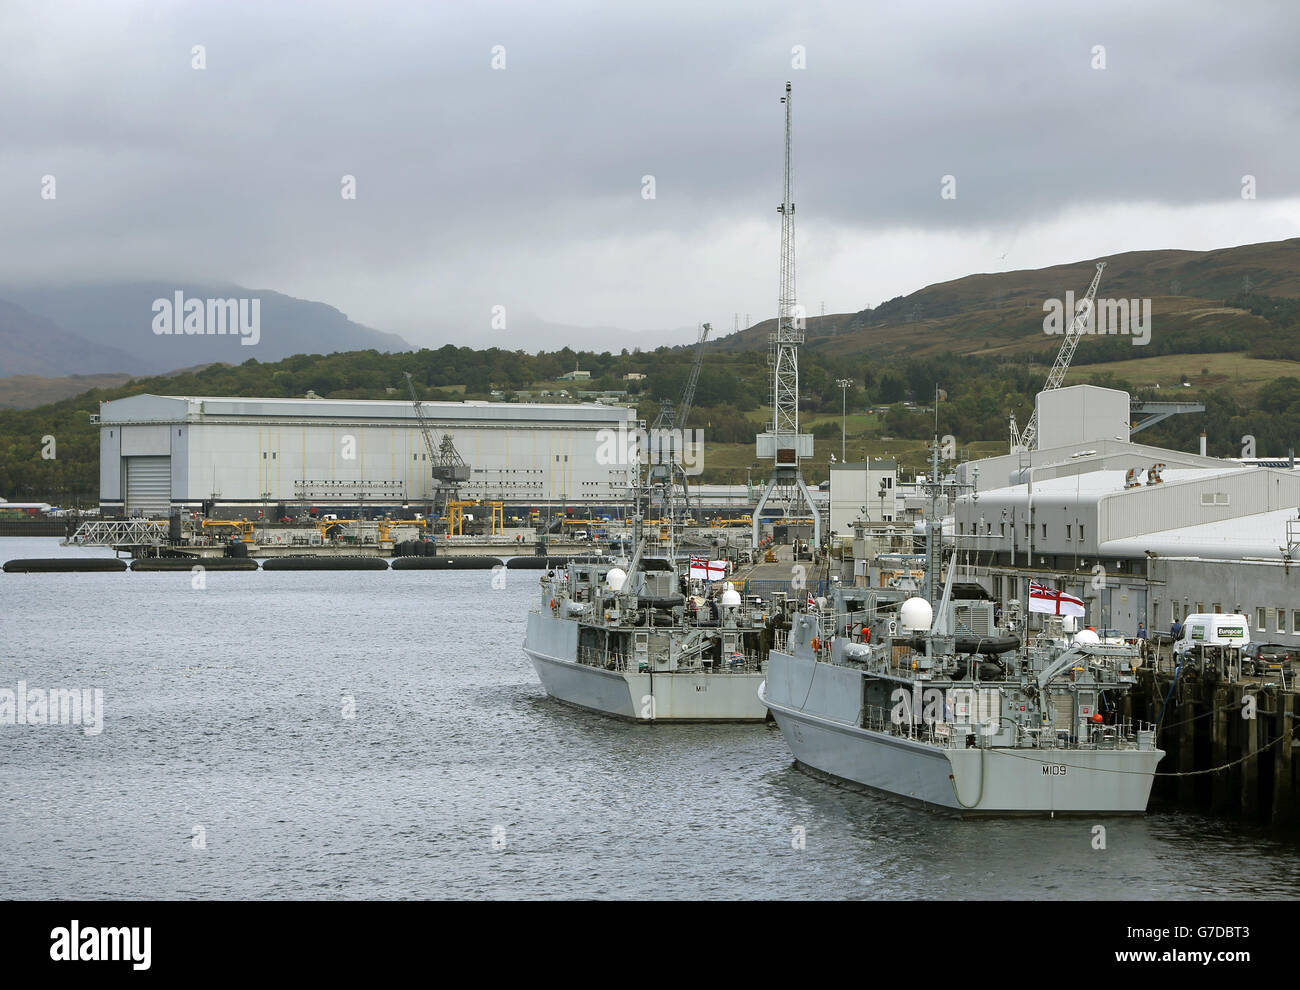 Faslane naval base, known officially as HM Naval Base Clyde, as the Ministry of Defence awards £3.2 billion of contracts to support the management of the UK's naval bases. Stock Photo